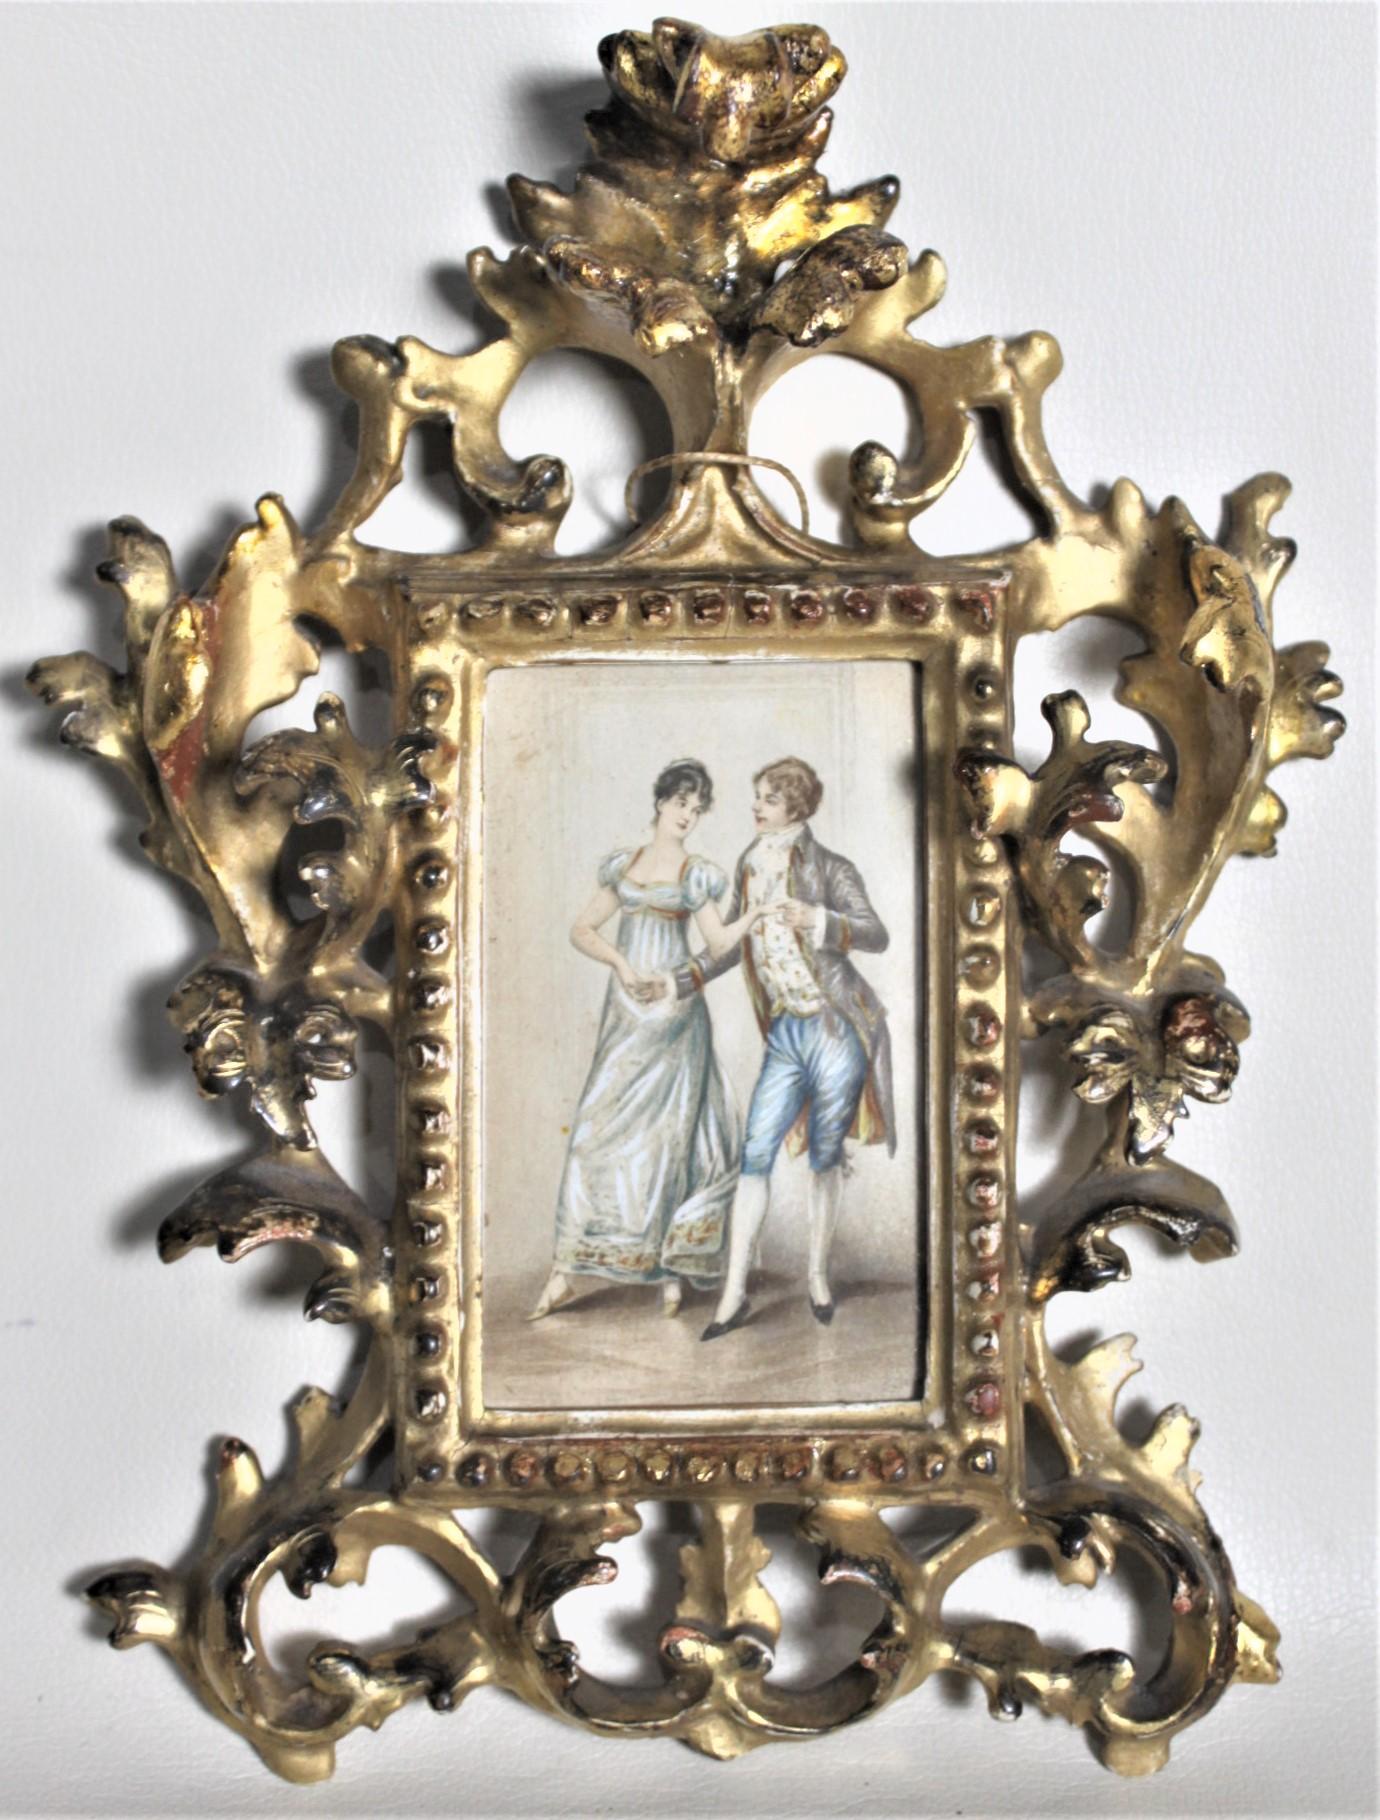 This pair of antique watercolor paintings are done by an unknown artist, likely from France or Italy in circa 1880 in a Renaissance style. The paintings each depict a couple in a ballroom setting dressed in period Renaissance costumes. The paintings